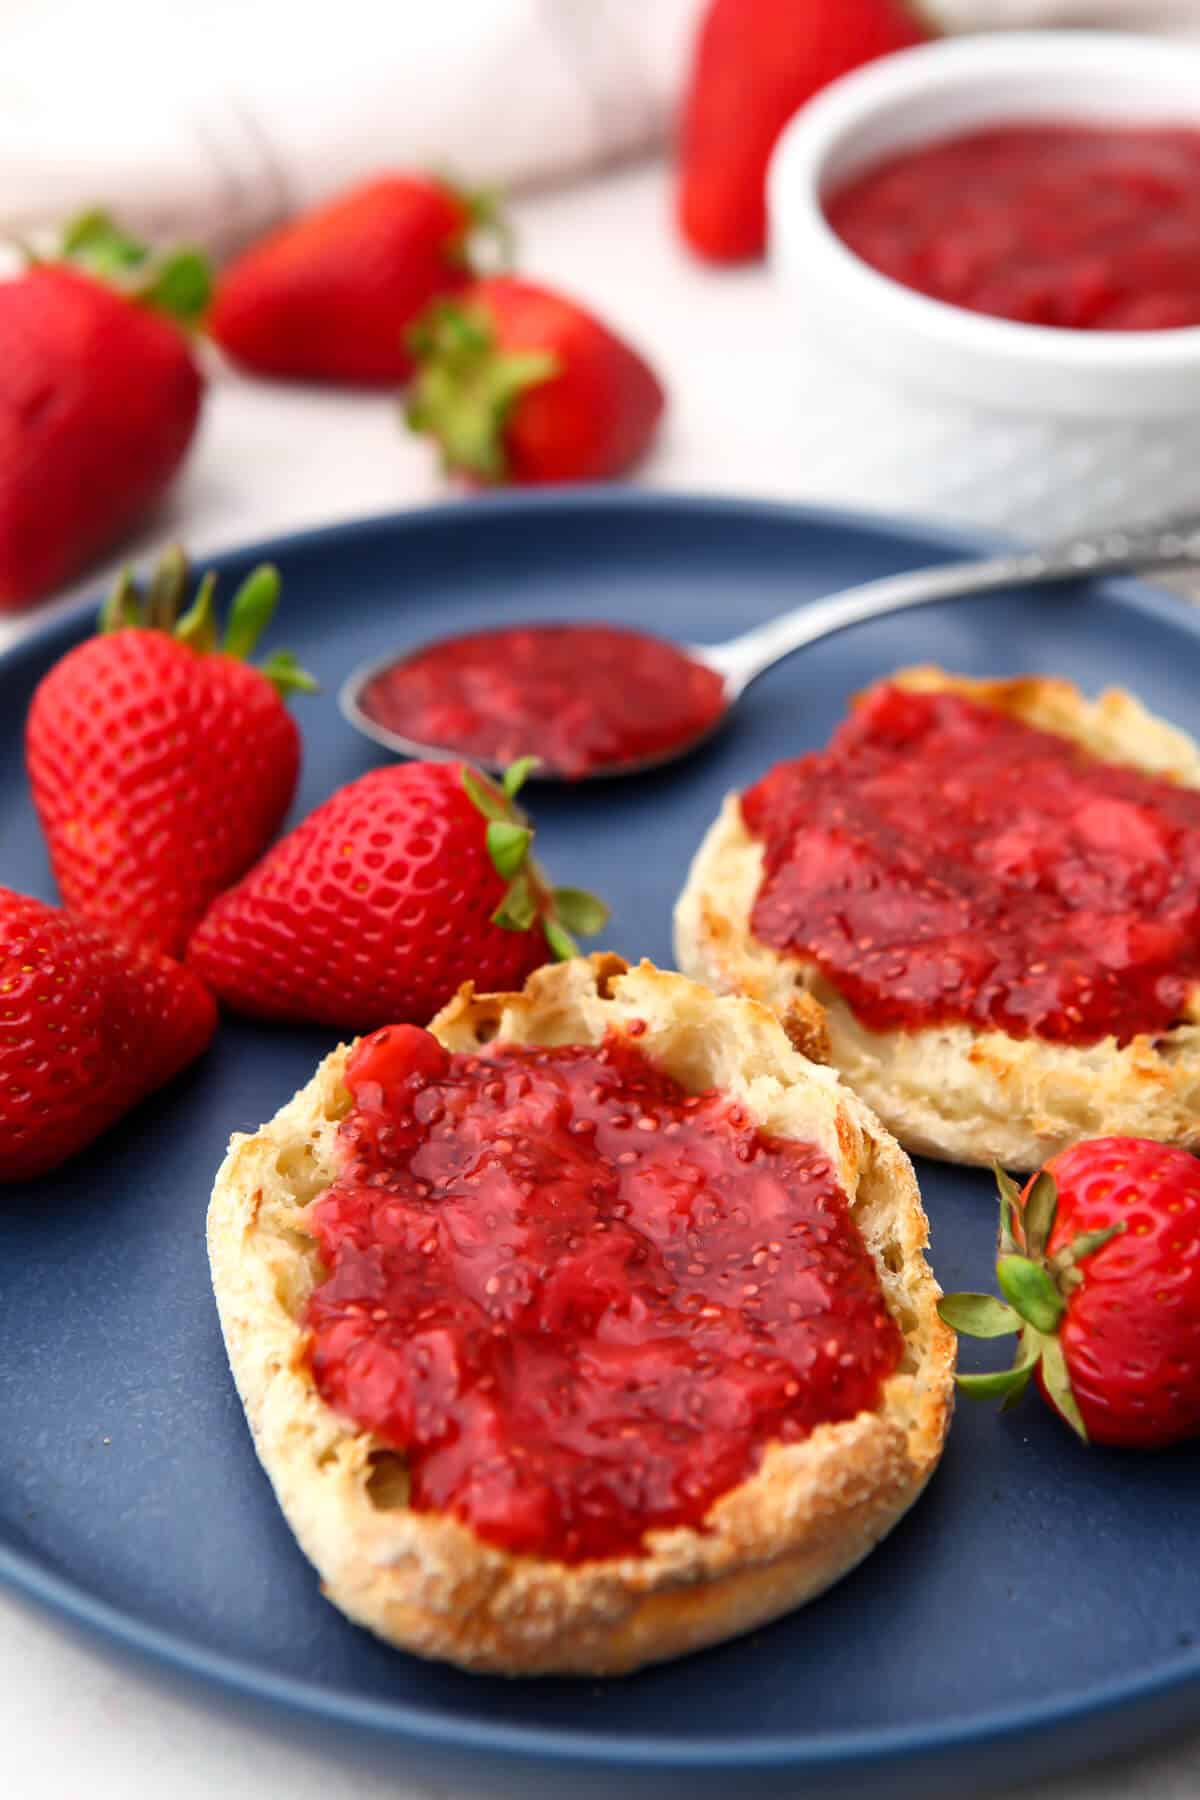 Strawberry chia seed jamb spread on two English muffins on a blue plate with strawberries around it.